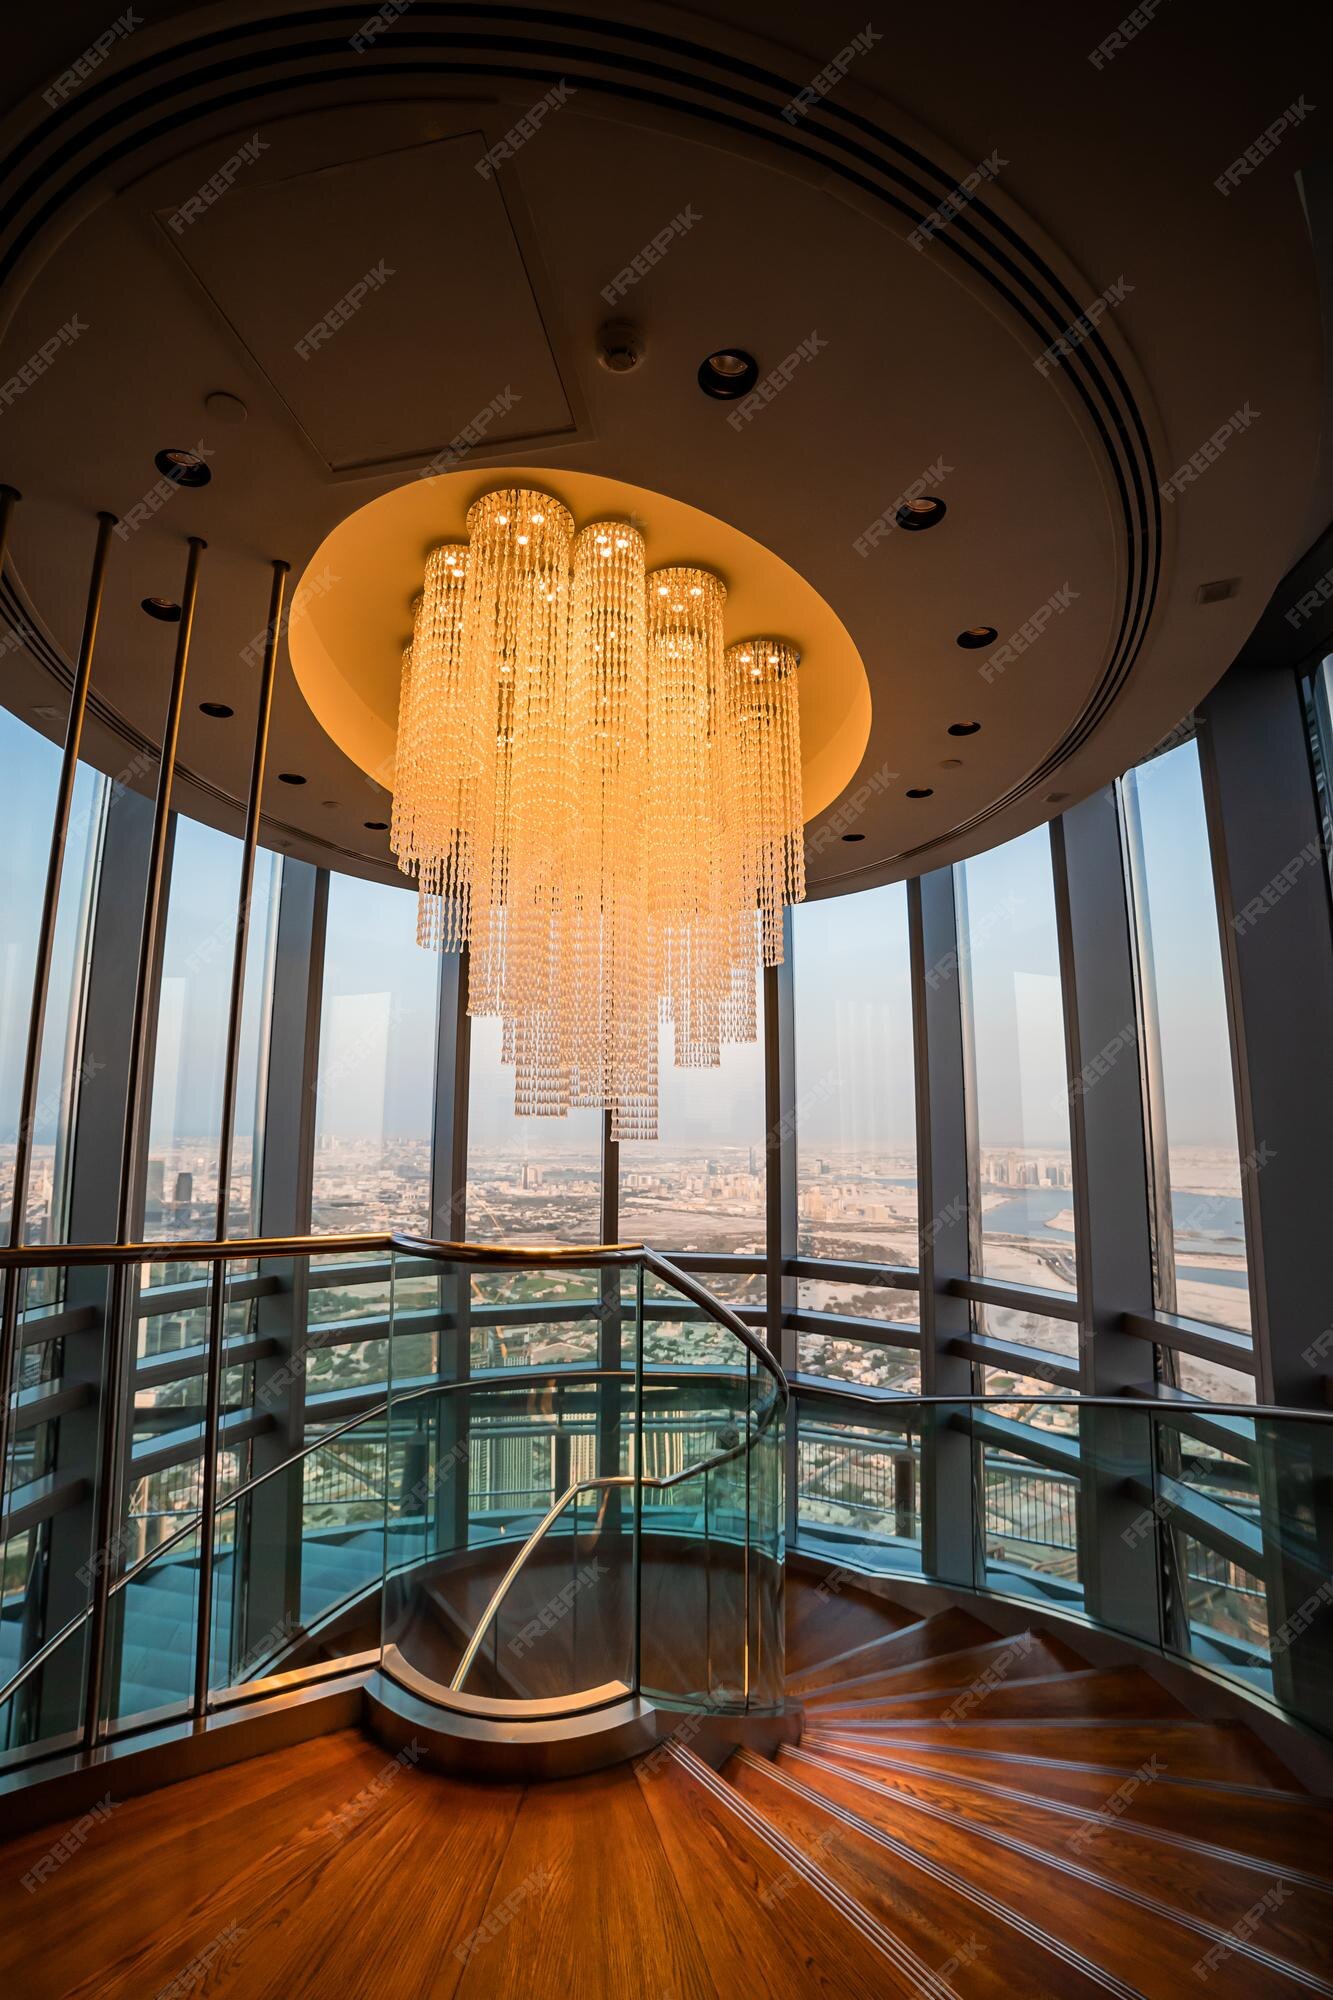 Laughter Orchard Travel Premium Photo | Inside of burj khalifa is the tallest skyscraper in the  world standing at 8298m in dubai uae